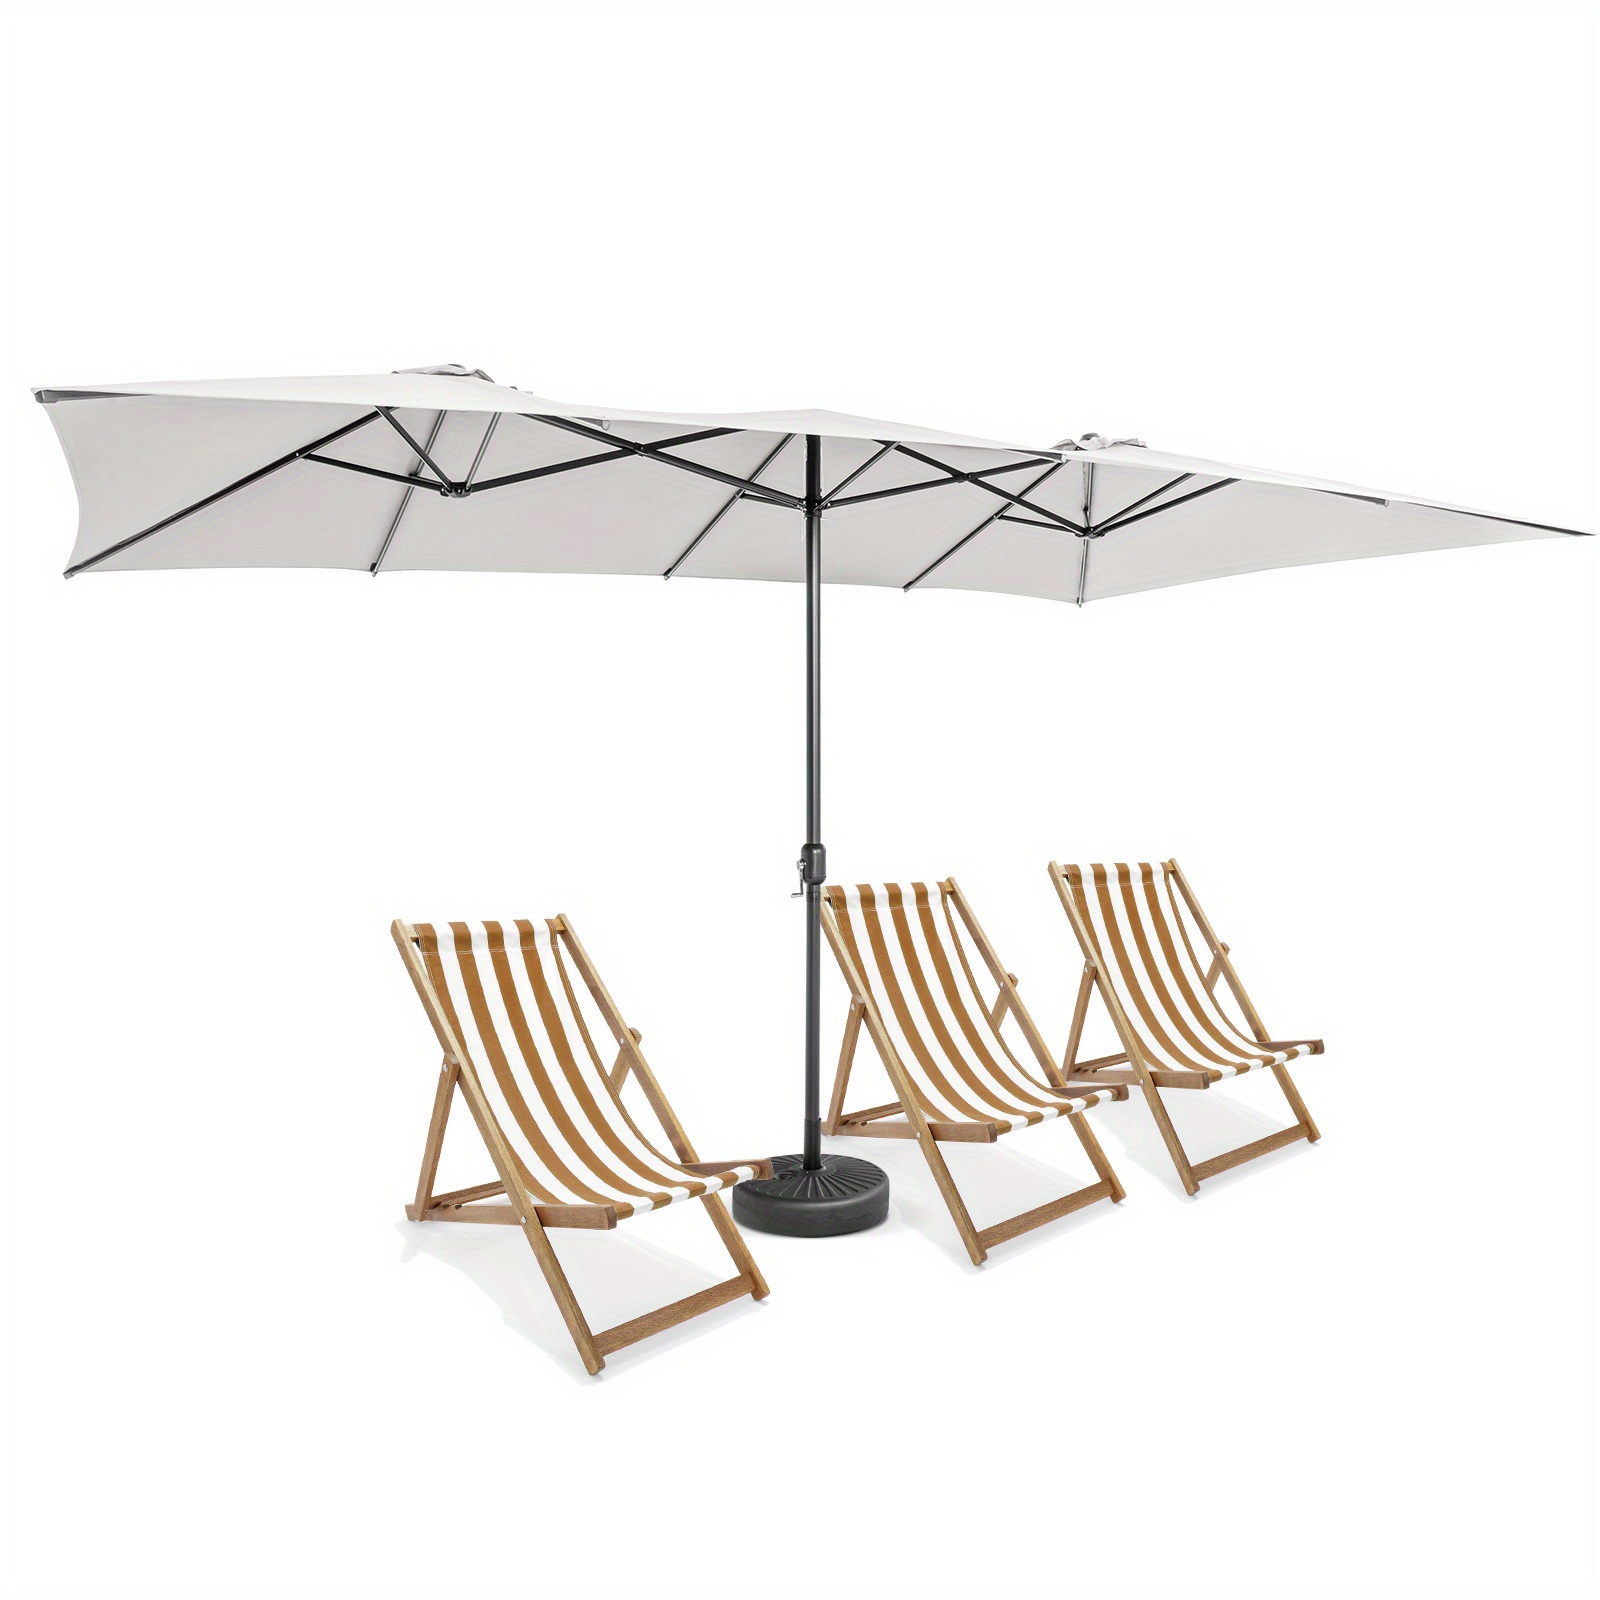 

Gymax 15ft Double-sided Market Umbrella Large Crank Handle Vented Twin Patio Beige